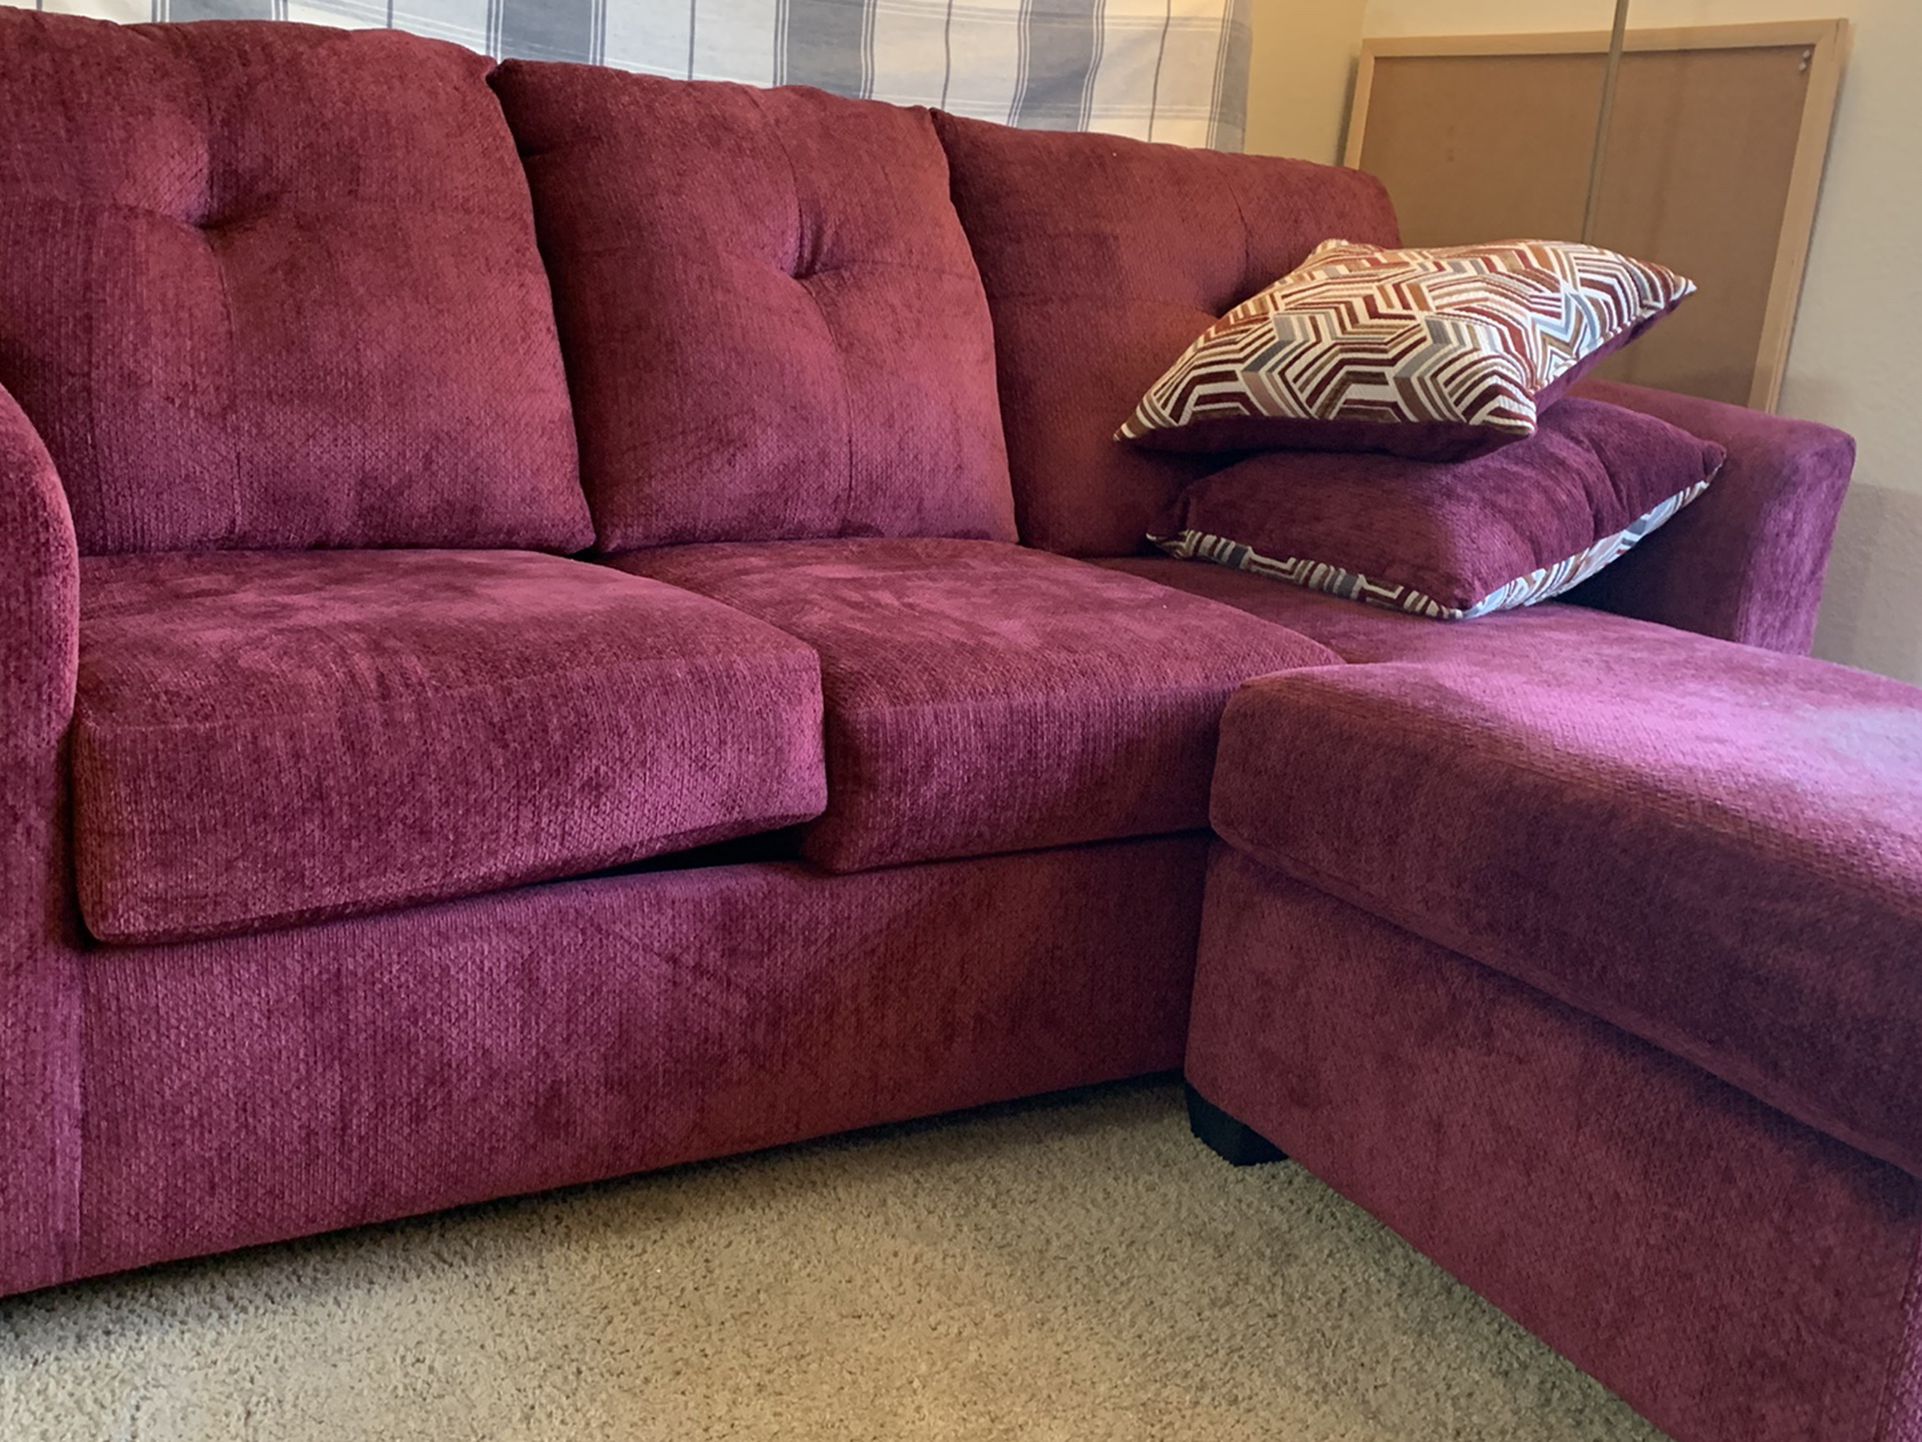 Red Sectional Sofa - $110